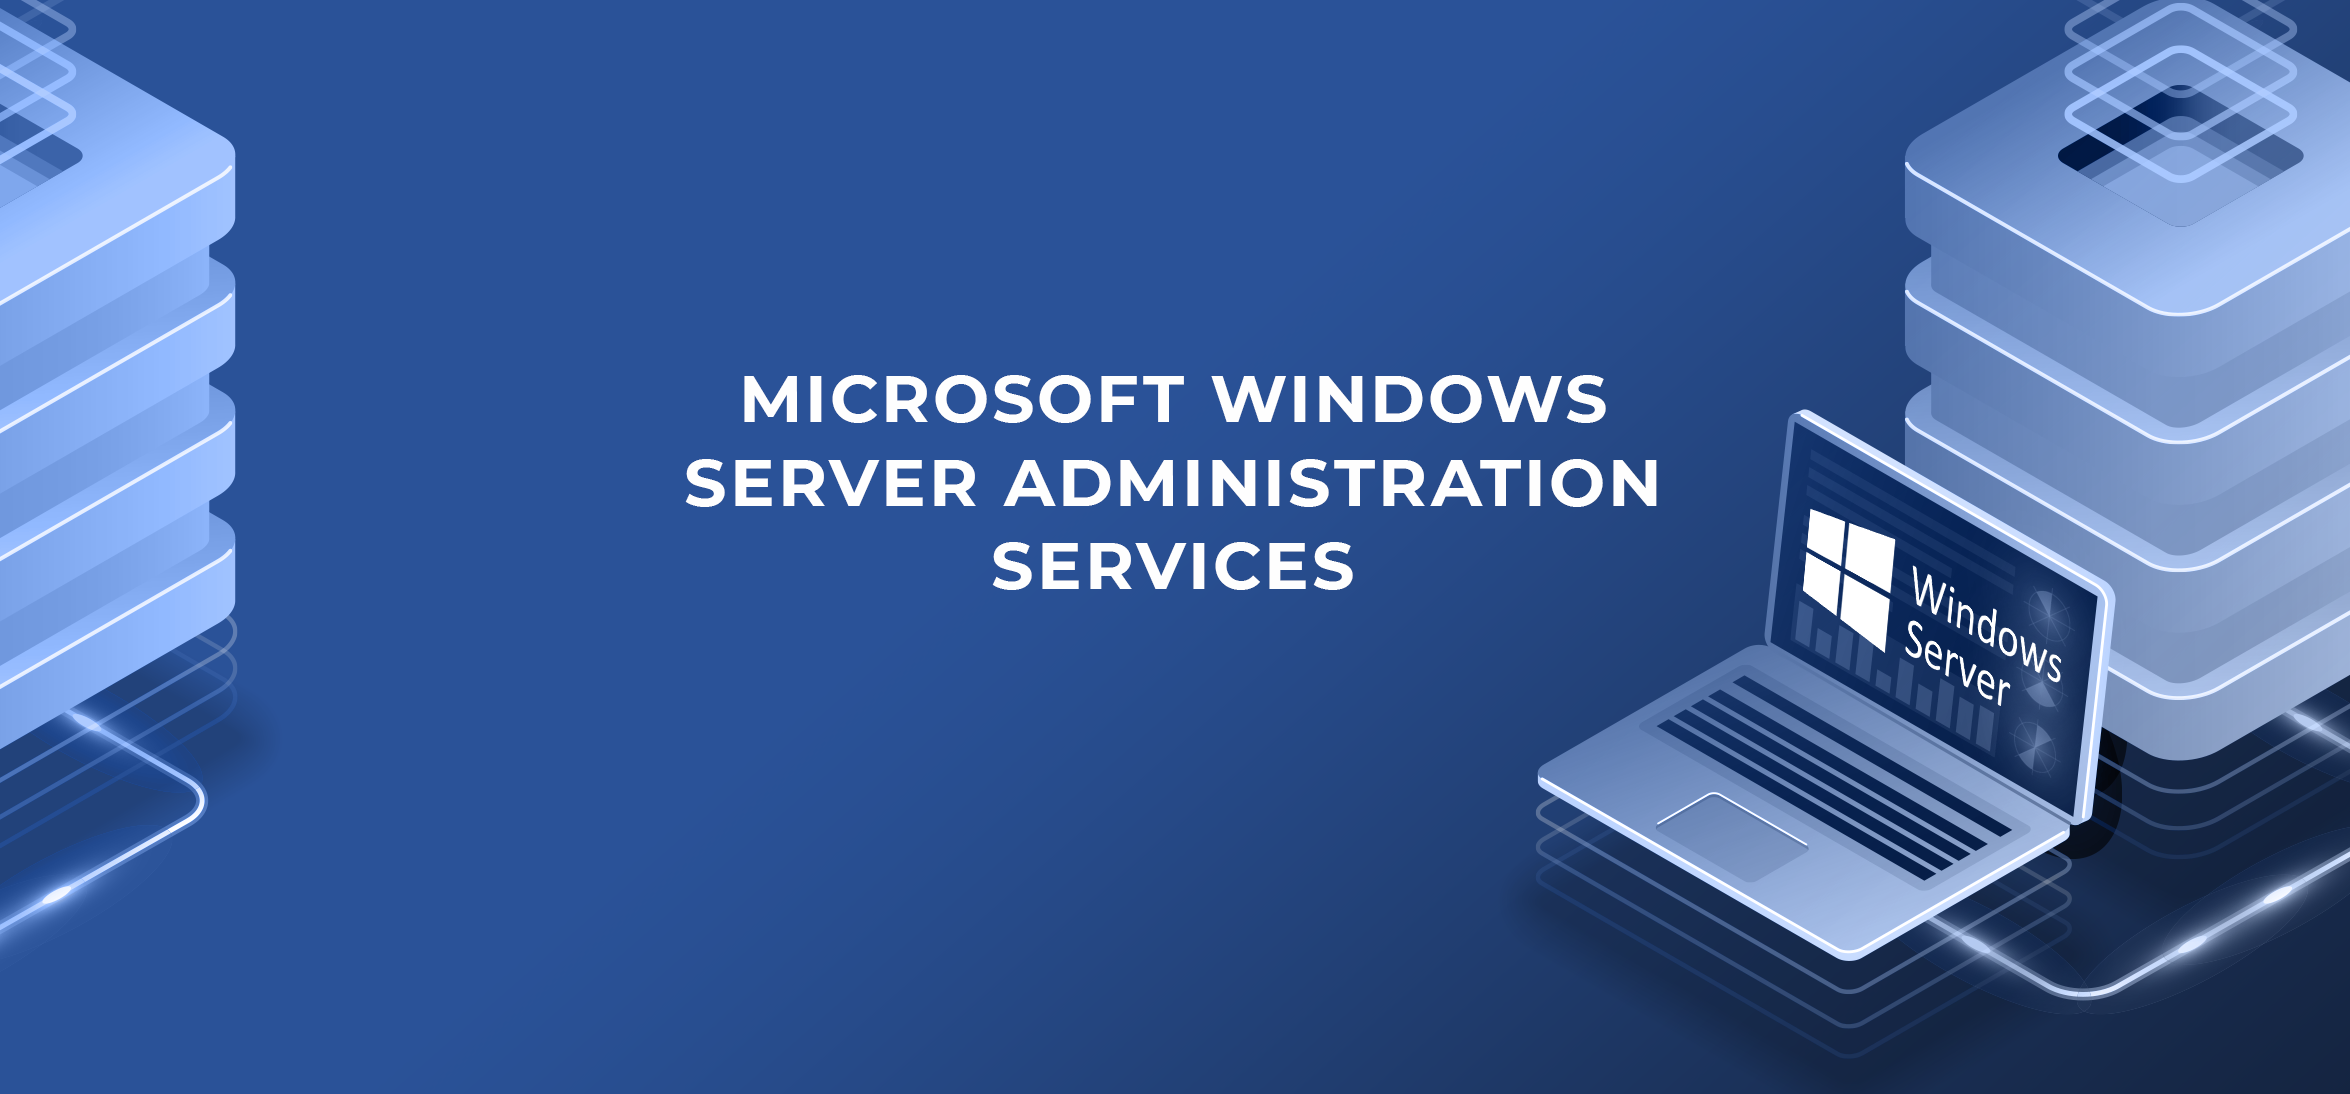 Effective Windows Server Administration and Support Solution Provider in Descanso CA, 91916